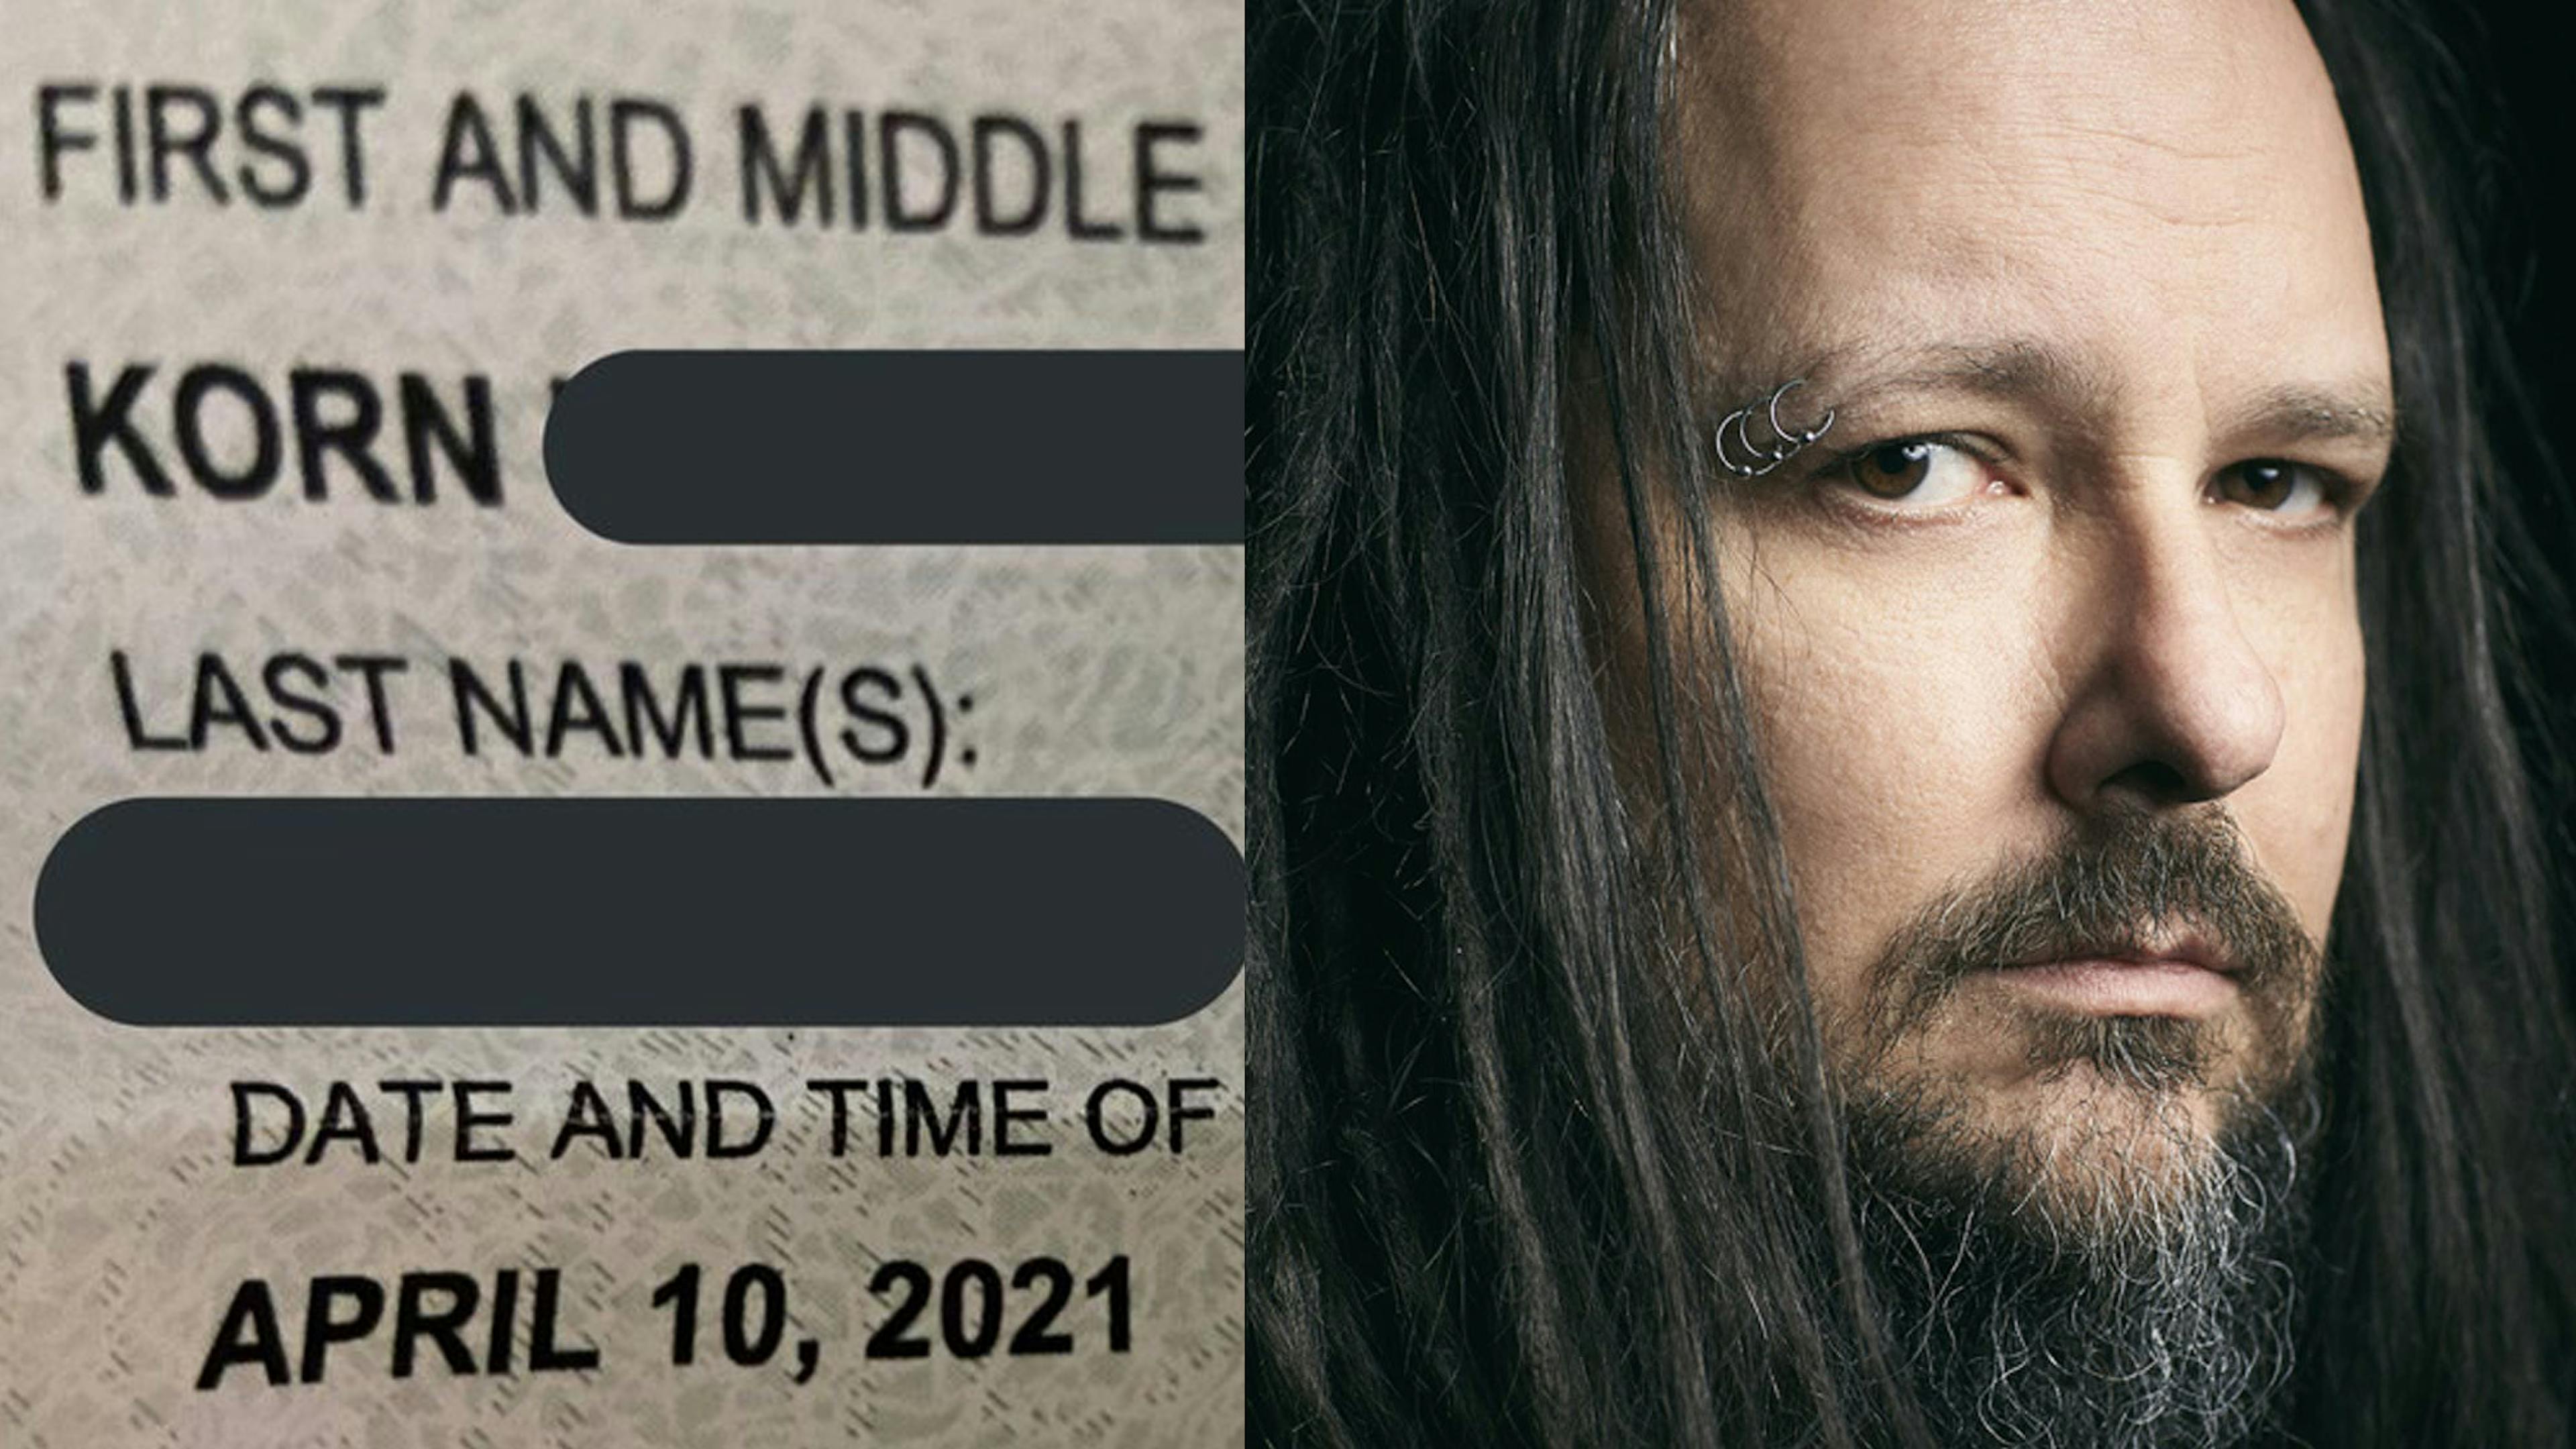 A newborn baby was accidentally named Korn due to a hospital error